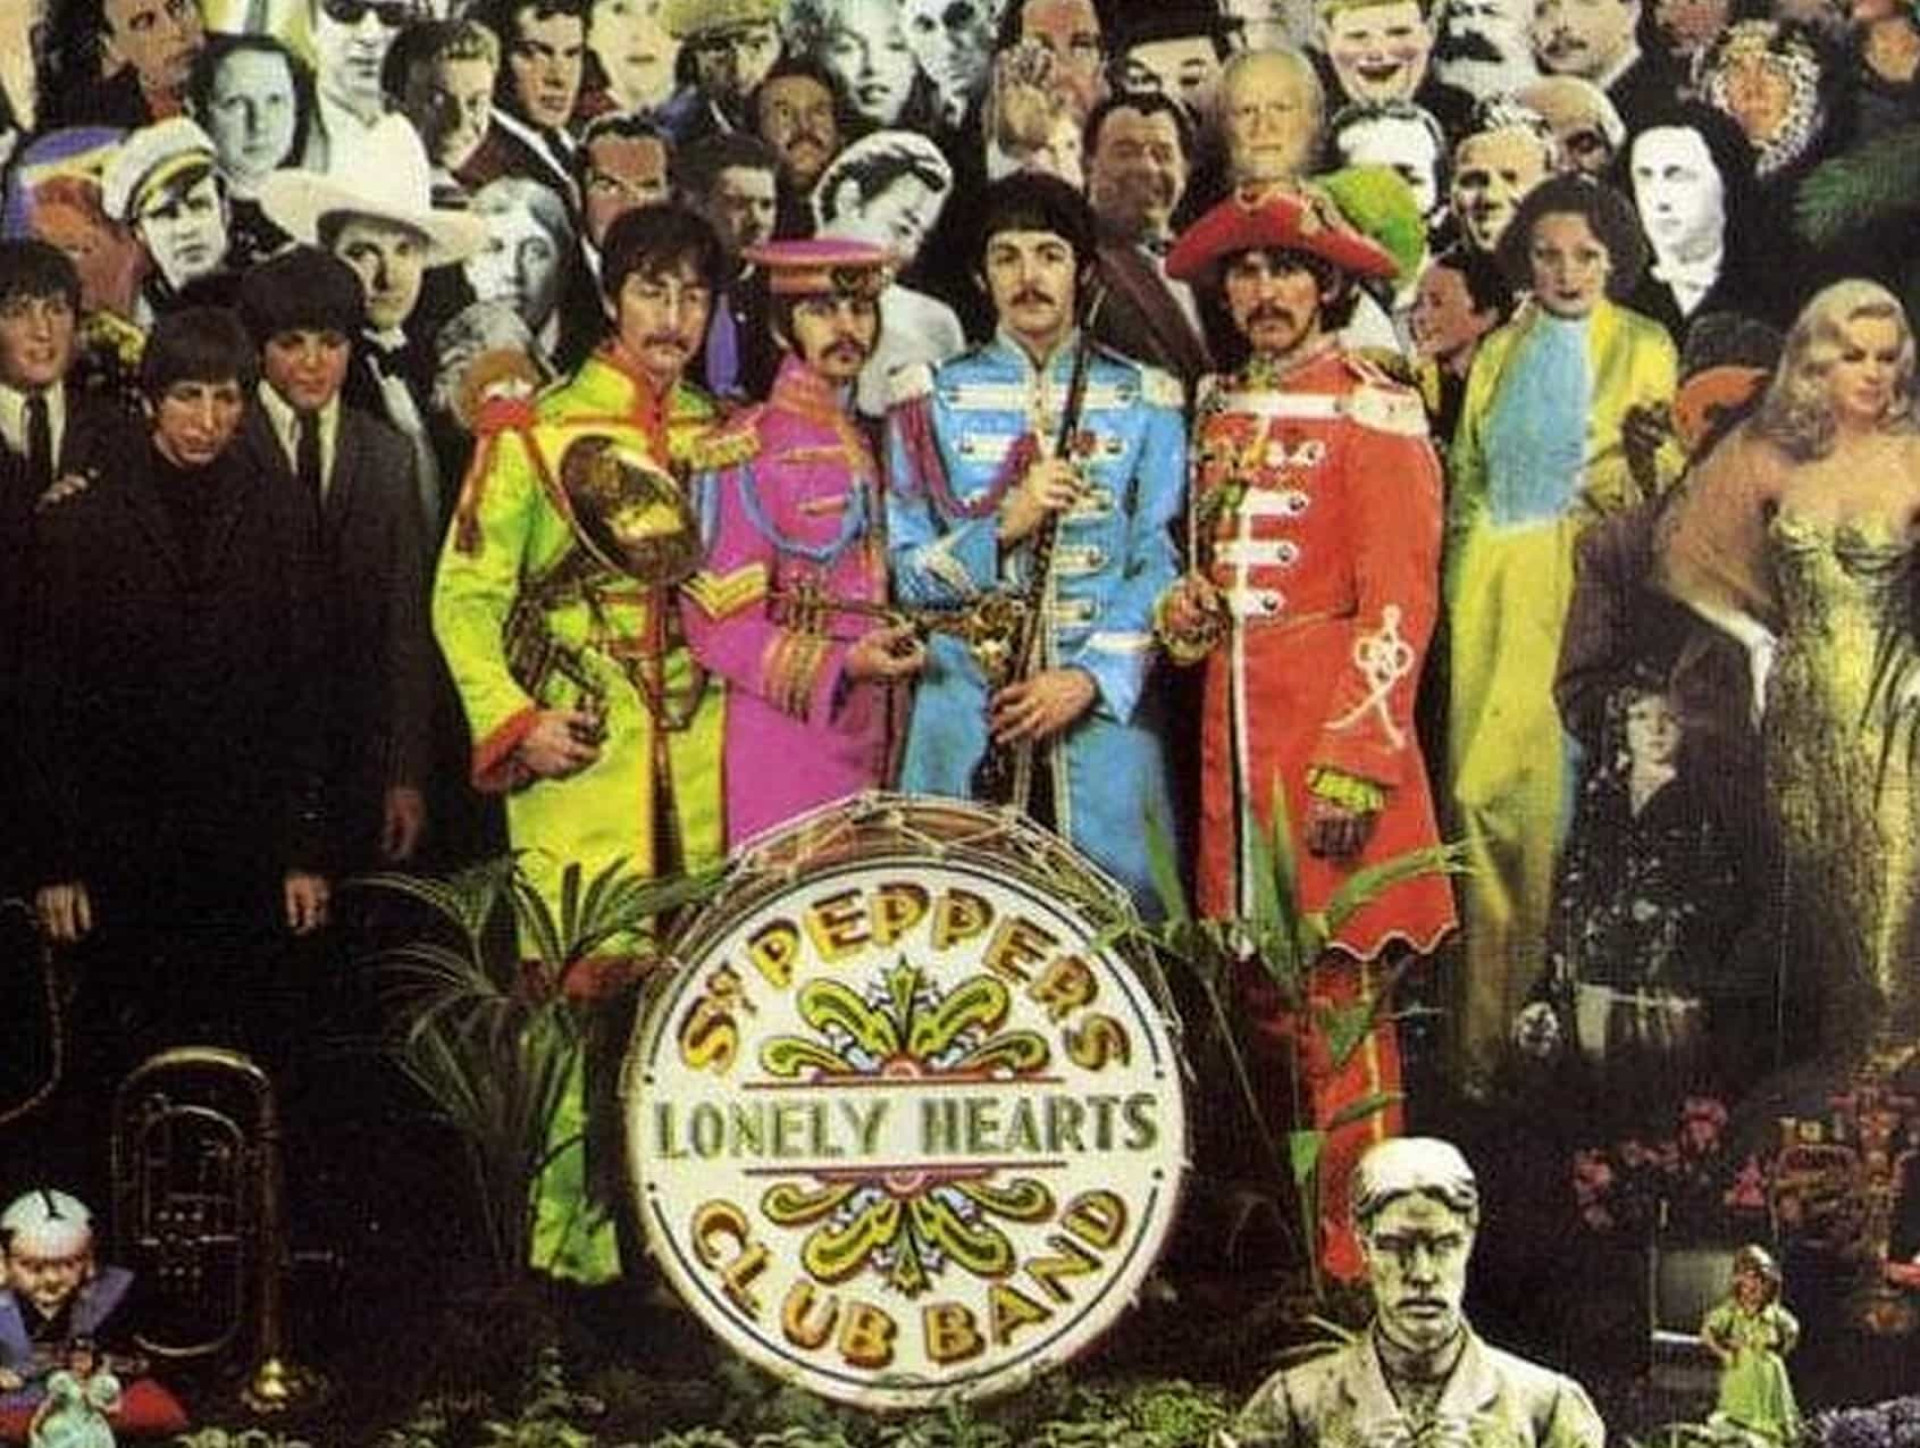 <p>Paul McCartney came up with the idea for this iconic 1967 outfit worn by the marching band on the 'Sgt. Pepper's Lonely Hearts Club Band' album. It was inspired by an Edwardian military band.</p>